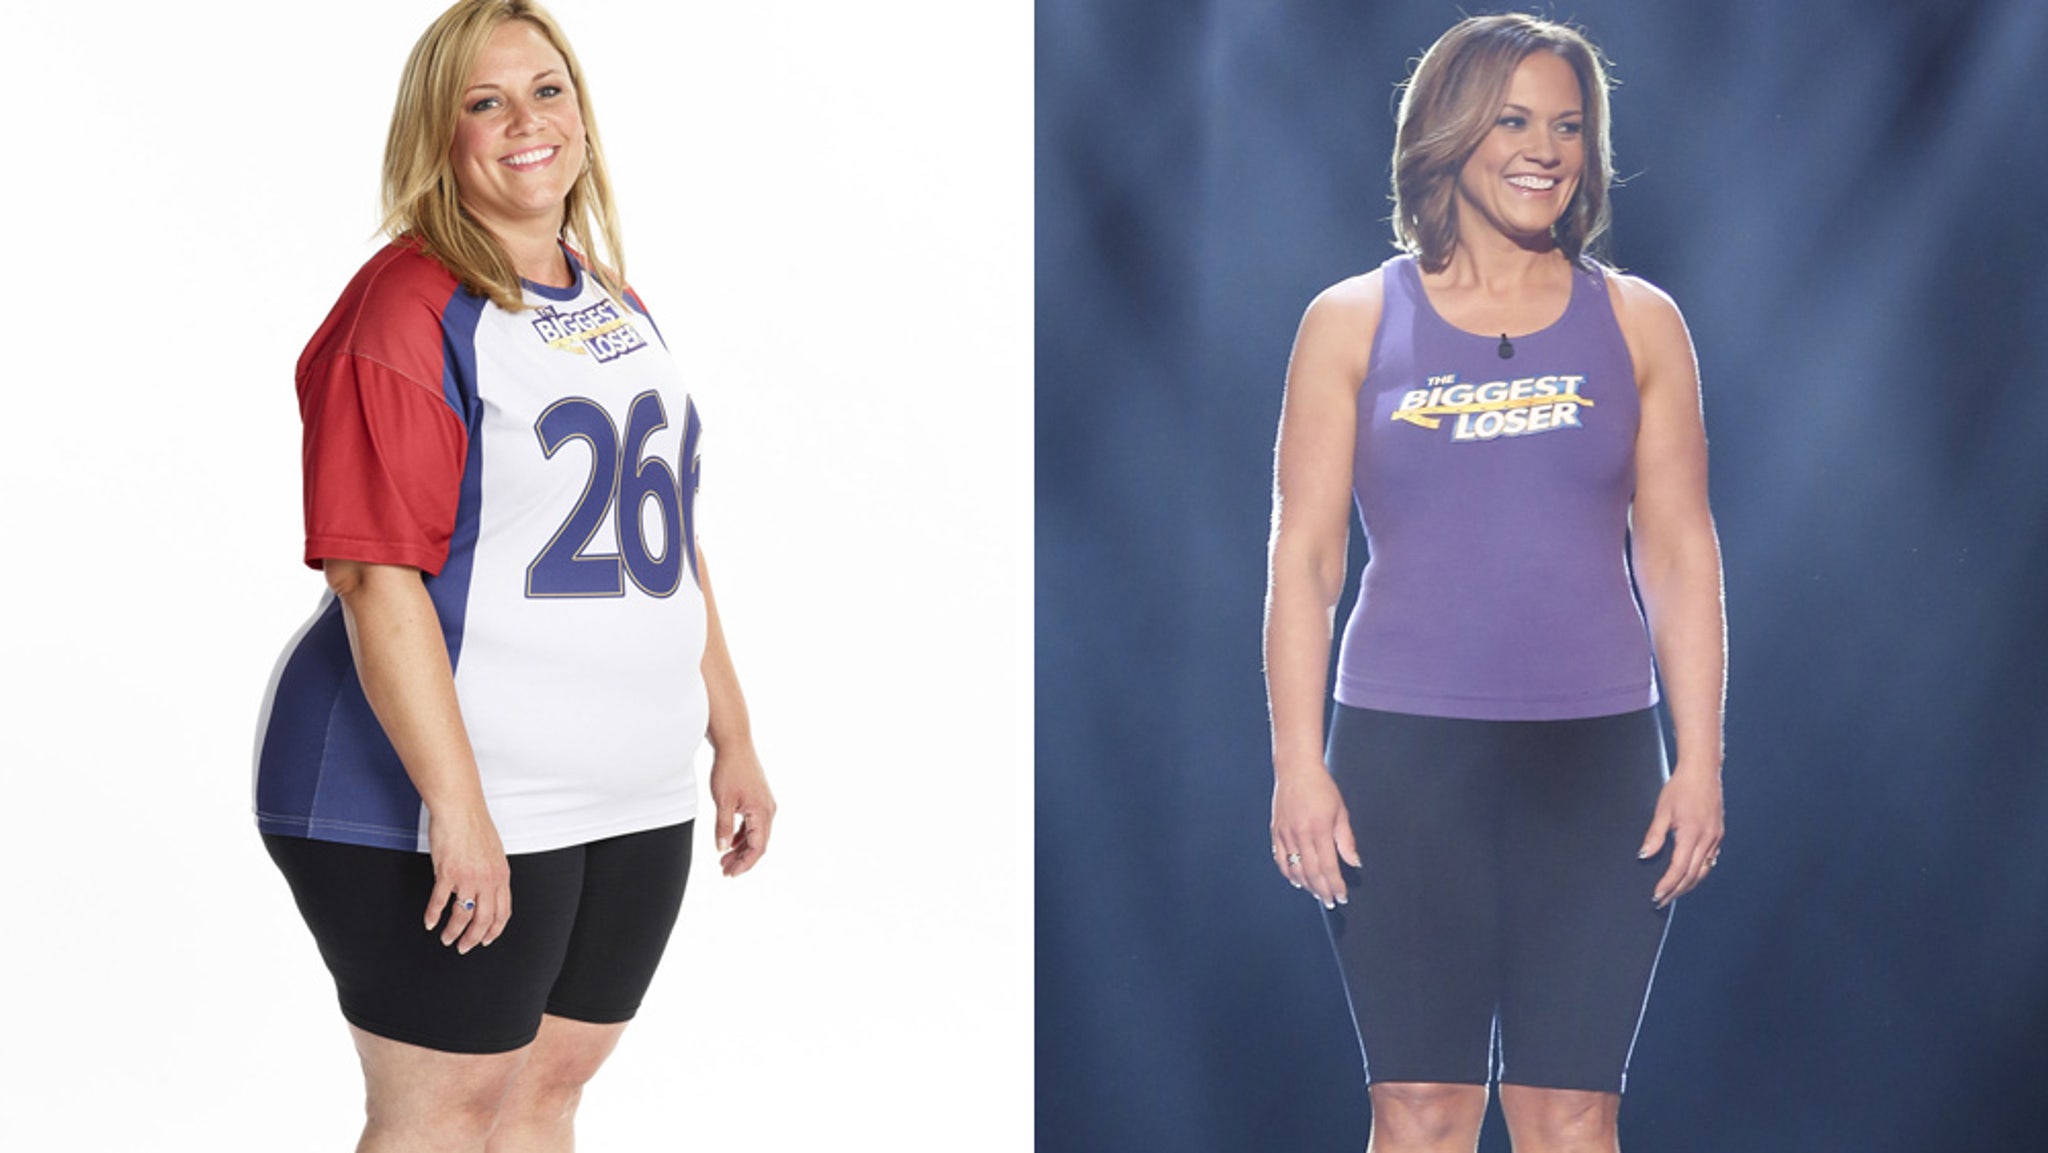 how to get on the biggest loser season 15